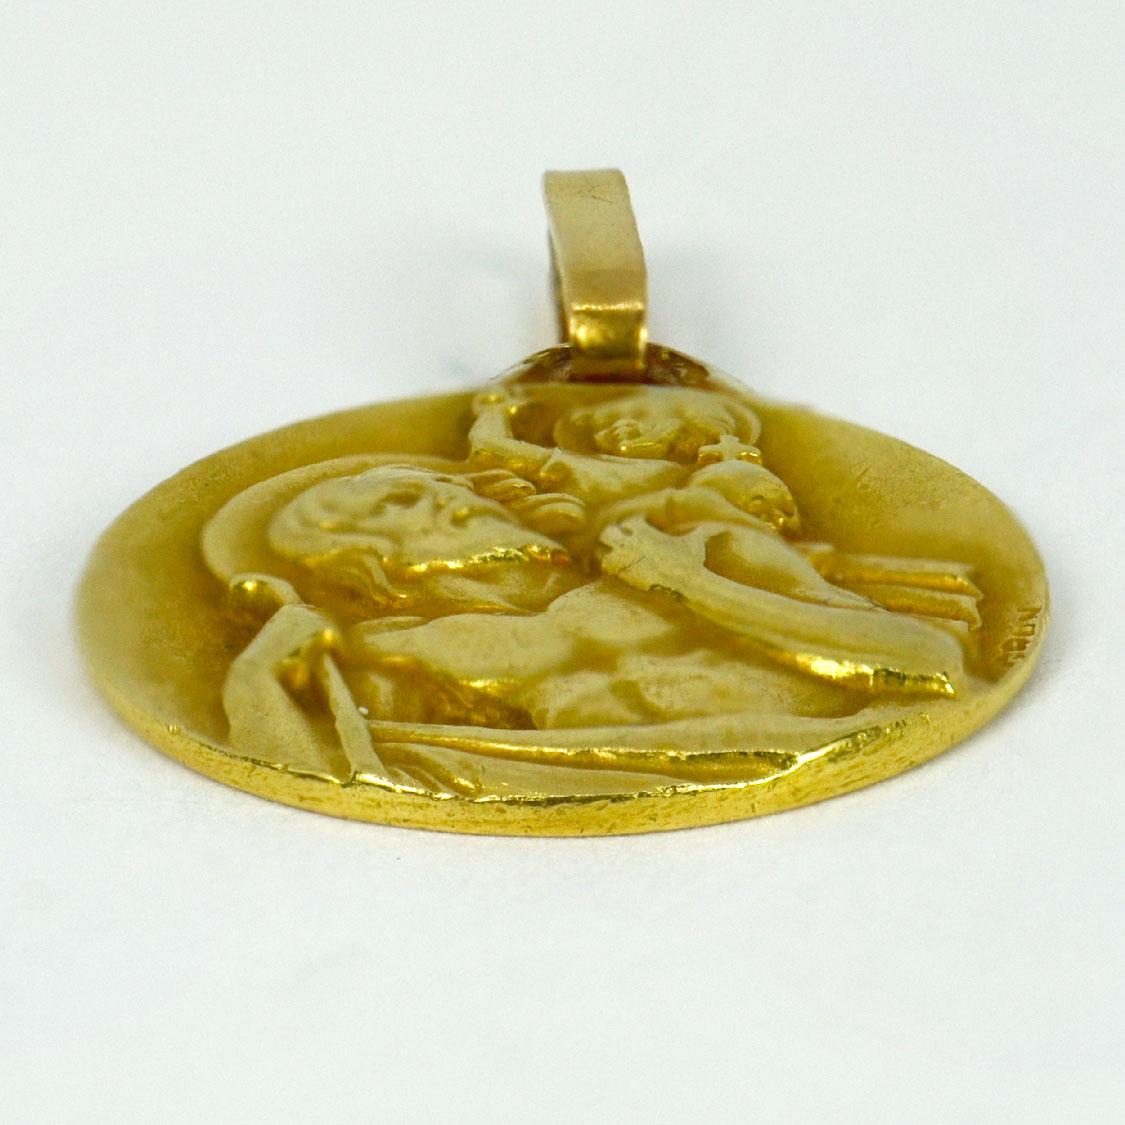 A French 18 karat (18K) yellow gold charm pendant designed as a disc representing Saint Christopher carrying the infant Christ. Signed Grun, stamped with the eagle's head for French manufacture and 18 karat gold with an unknown maker’s mark.